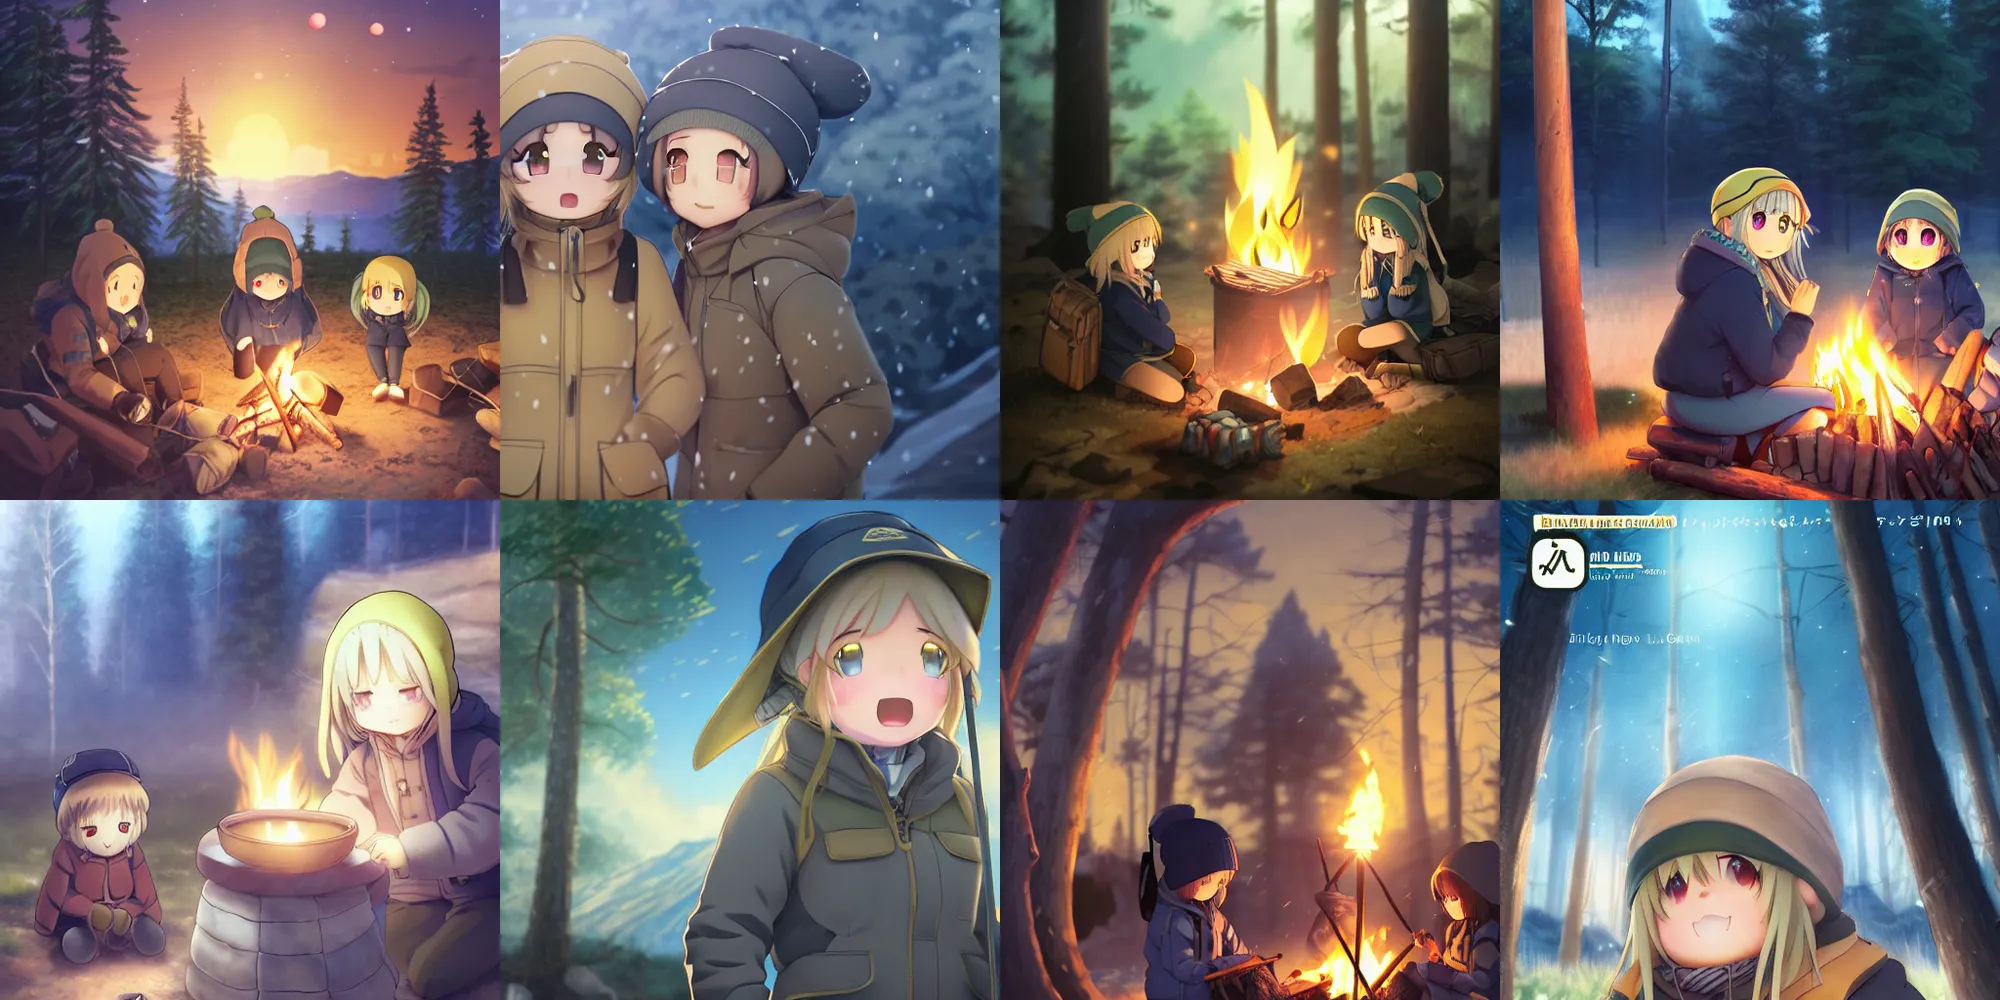 Cozy Campfires, Bitter Broth: Female Relationships in Laid-Back Camp and  Ms. Koizumi Loves Ramen Noodles - Anime Feminist